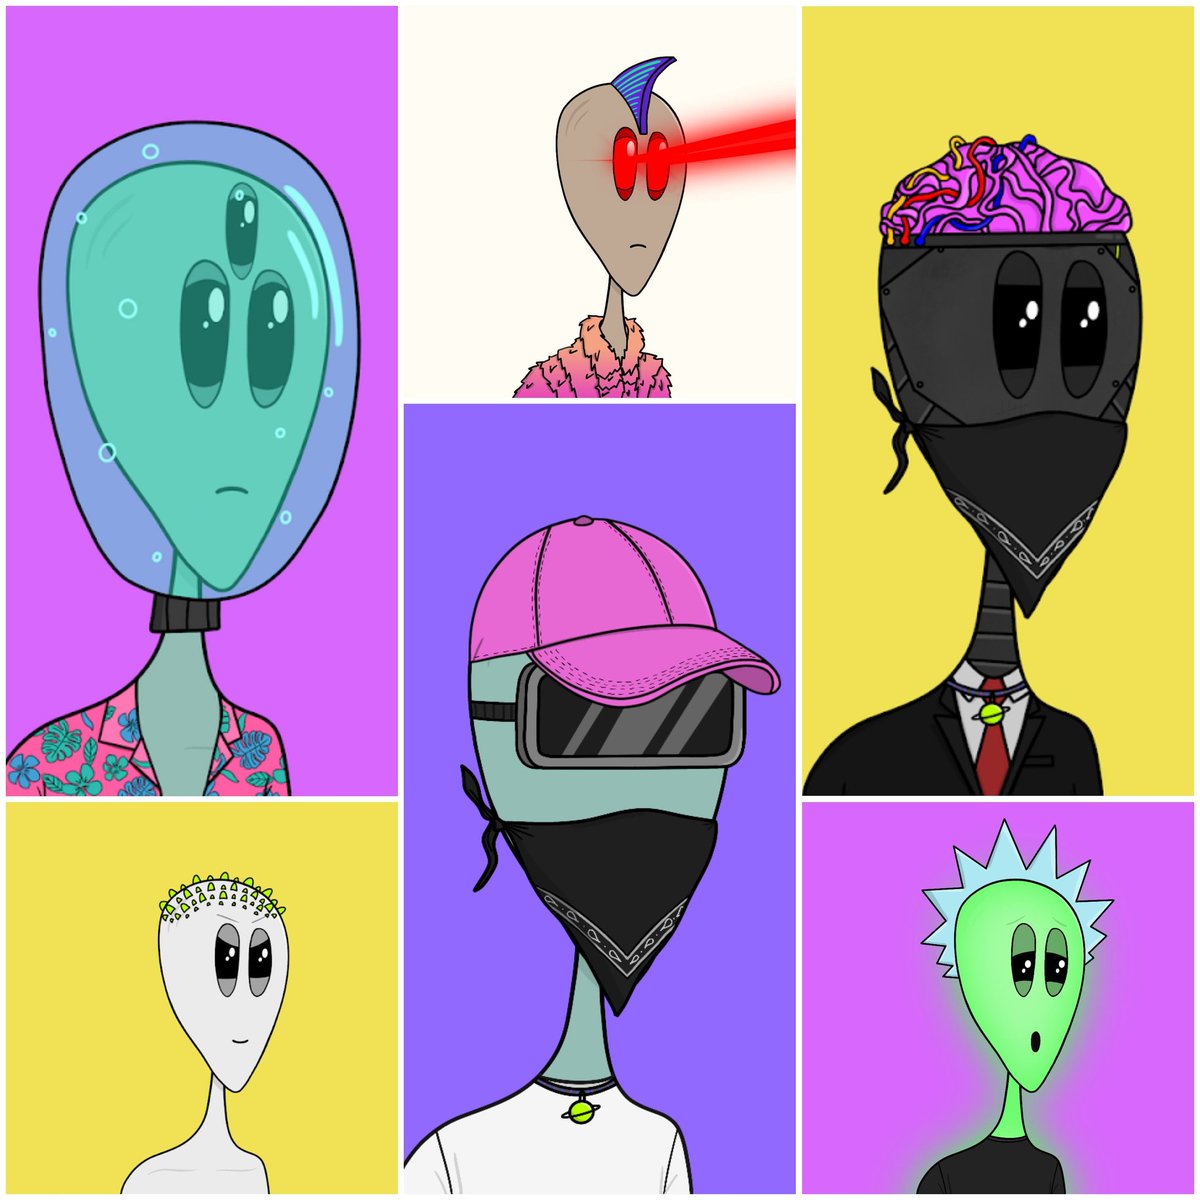 RT @Geepsaps: @ashrobinqt Check out some @thelonelyaliens. OG aliens solid community and fucking fire art https://t.co/hcubrg02Yj